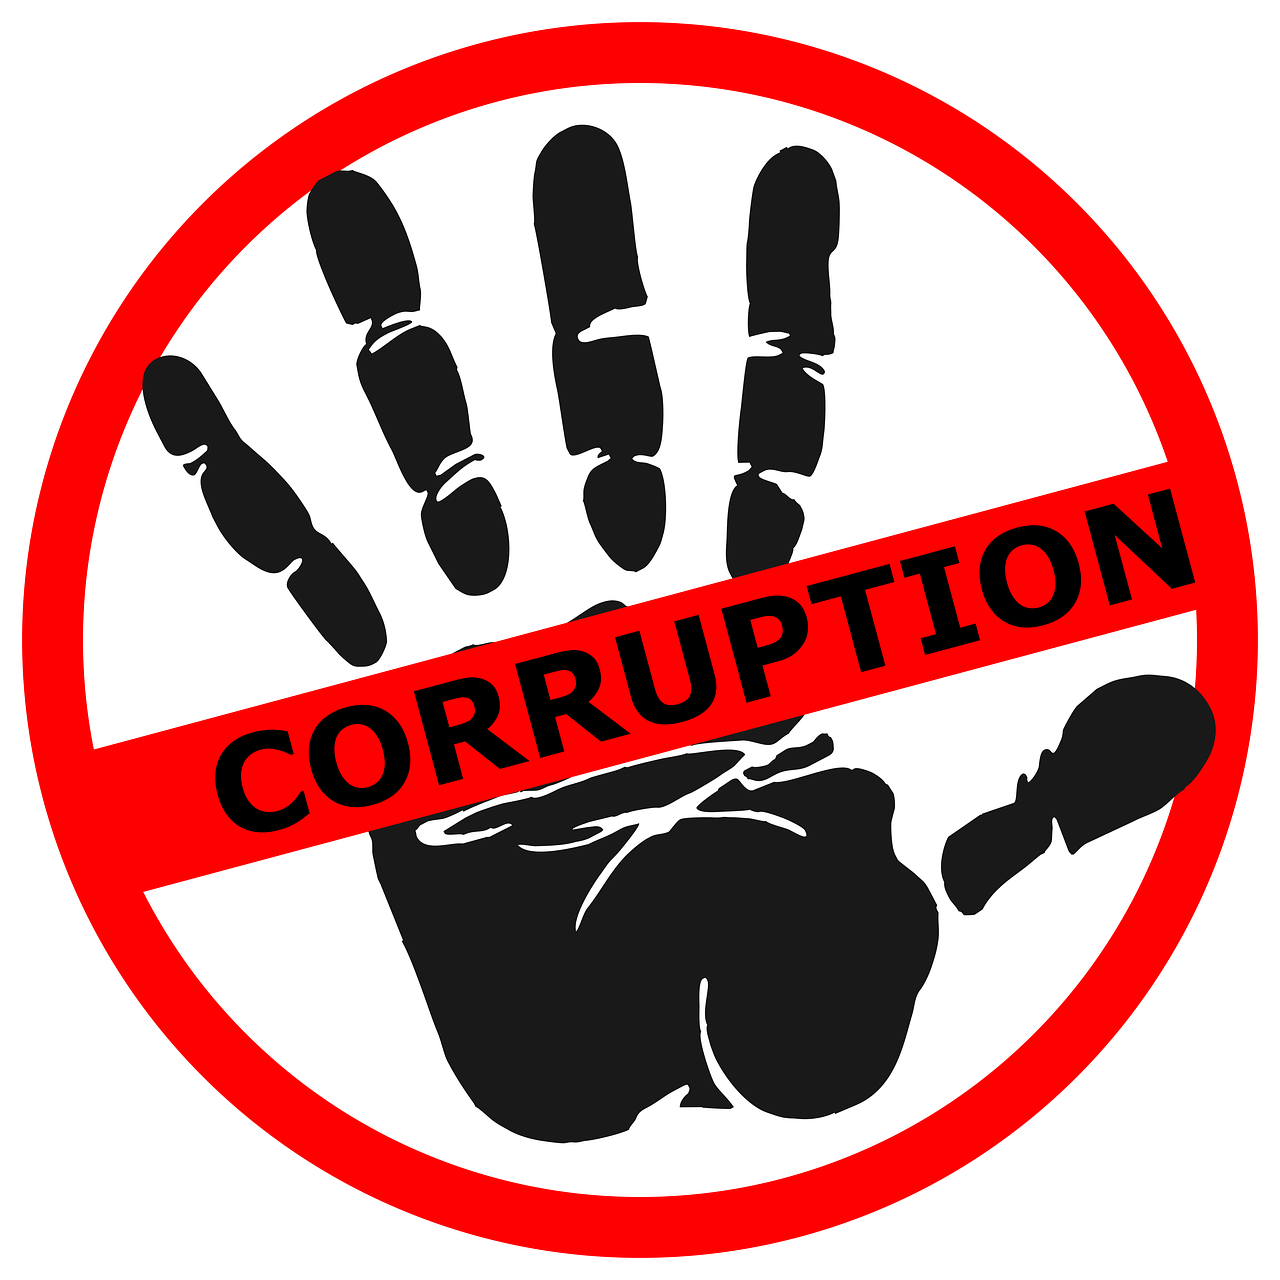 Nagaland was 'corruption-free' in 2018: NCRB data